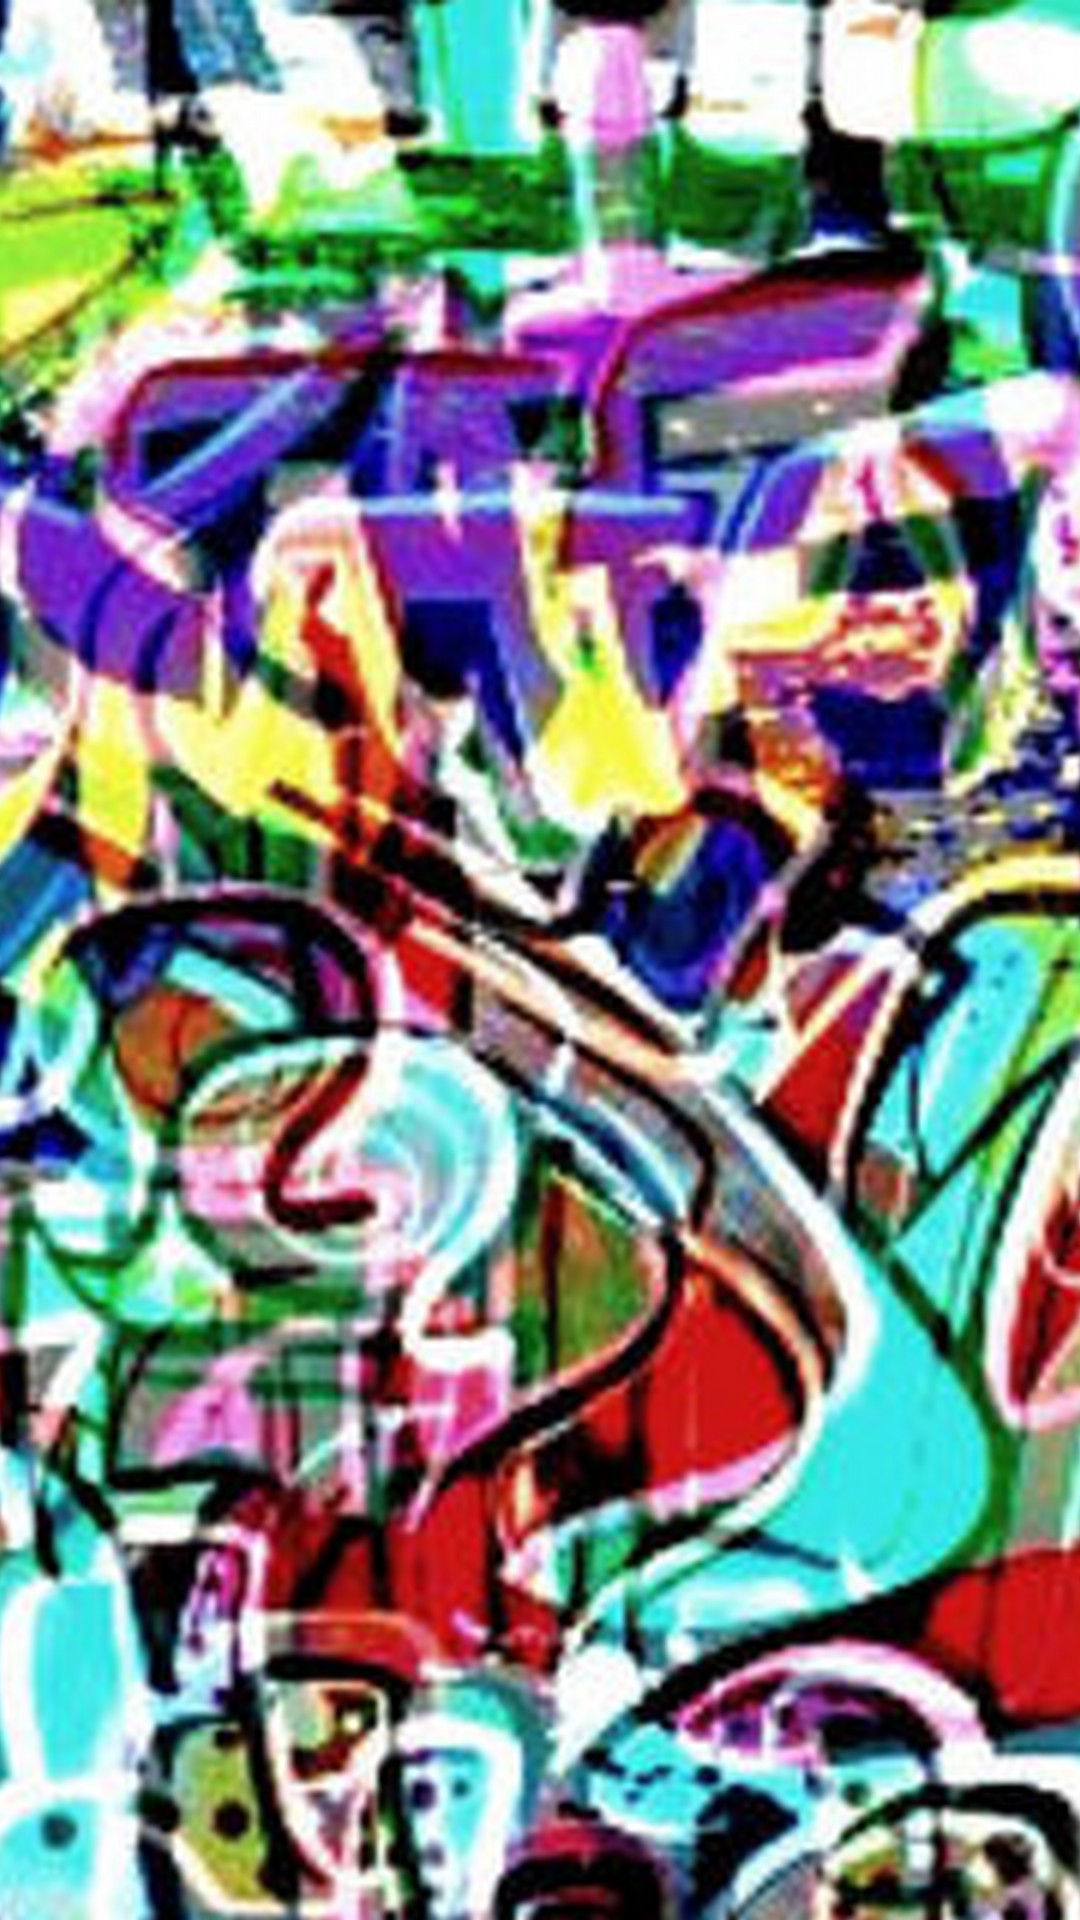 Graffiti Wallpaper For Android with resolution 1080X1920 pixel. You can make this wallpaper for your Android backgrounds, Tablet, Smartphones Screensavers and Mobile Phone Lock Screen